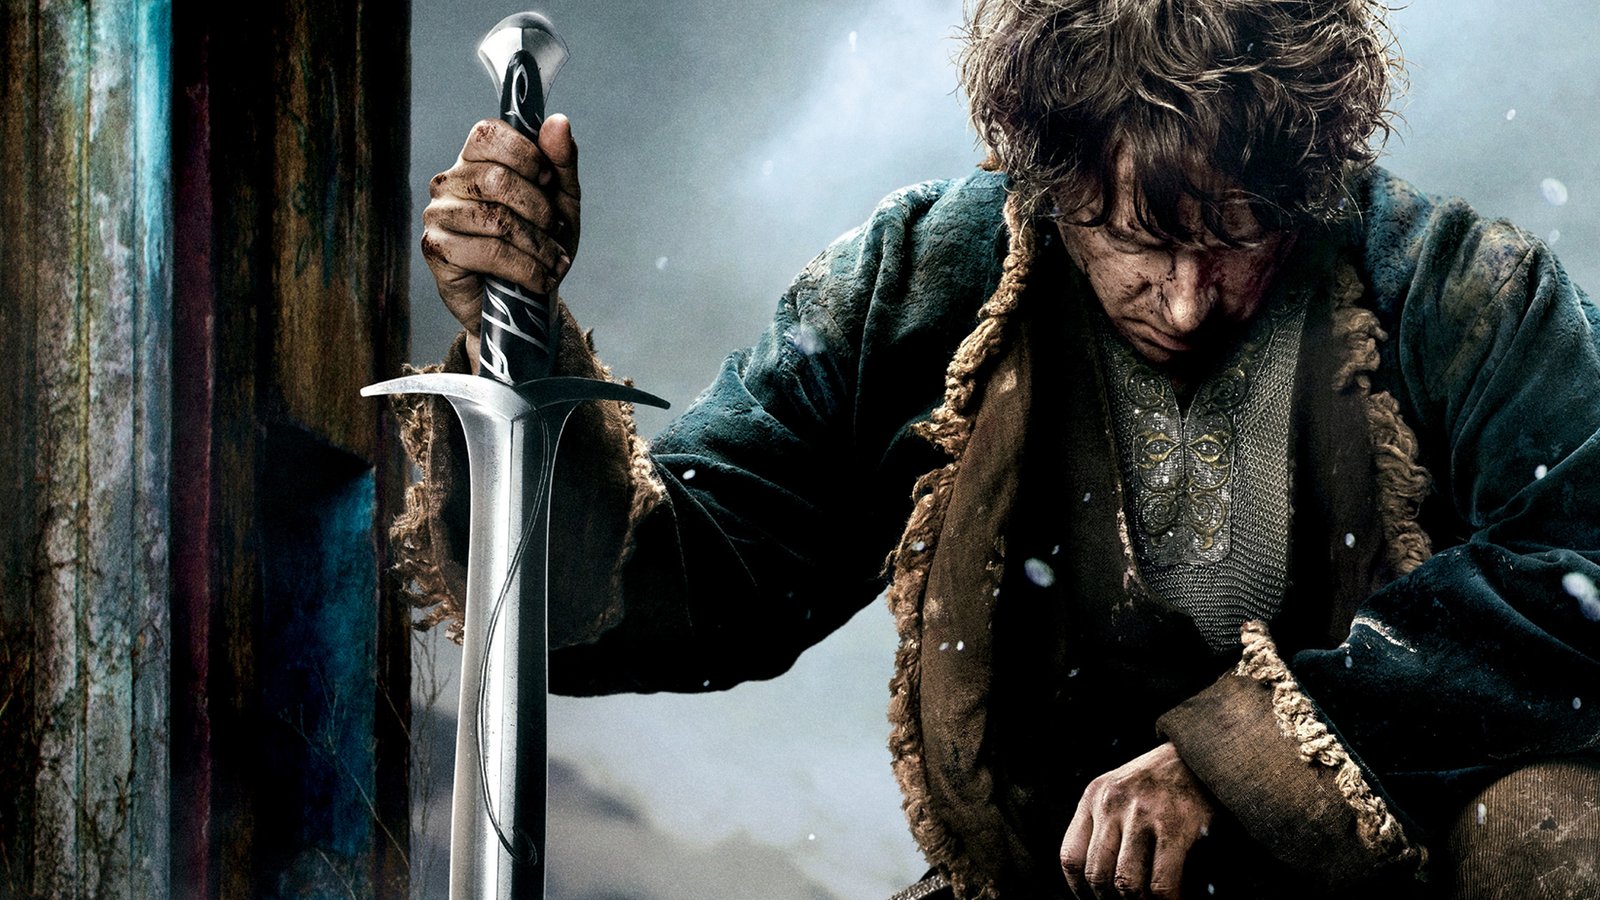  / The Hobbit: The Battle of the Five Armies